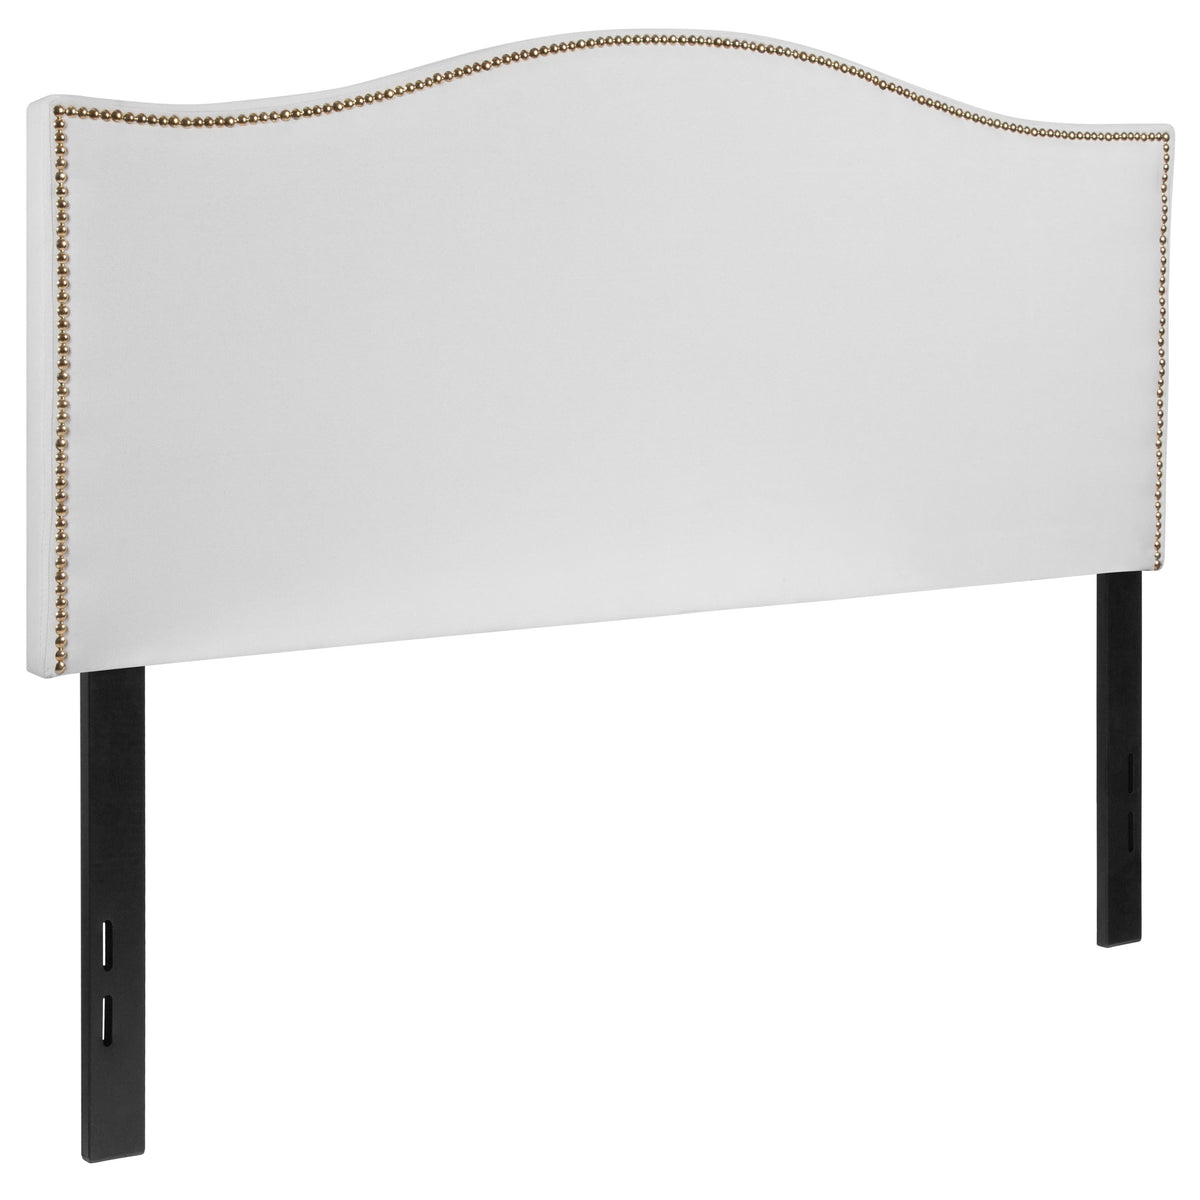 White,Full |#| Upholstered Full Size Arched Headboard with Accent Nail Trim in White Fabric